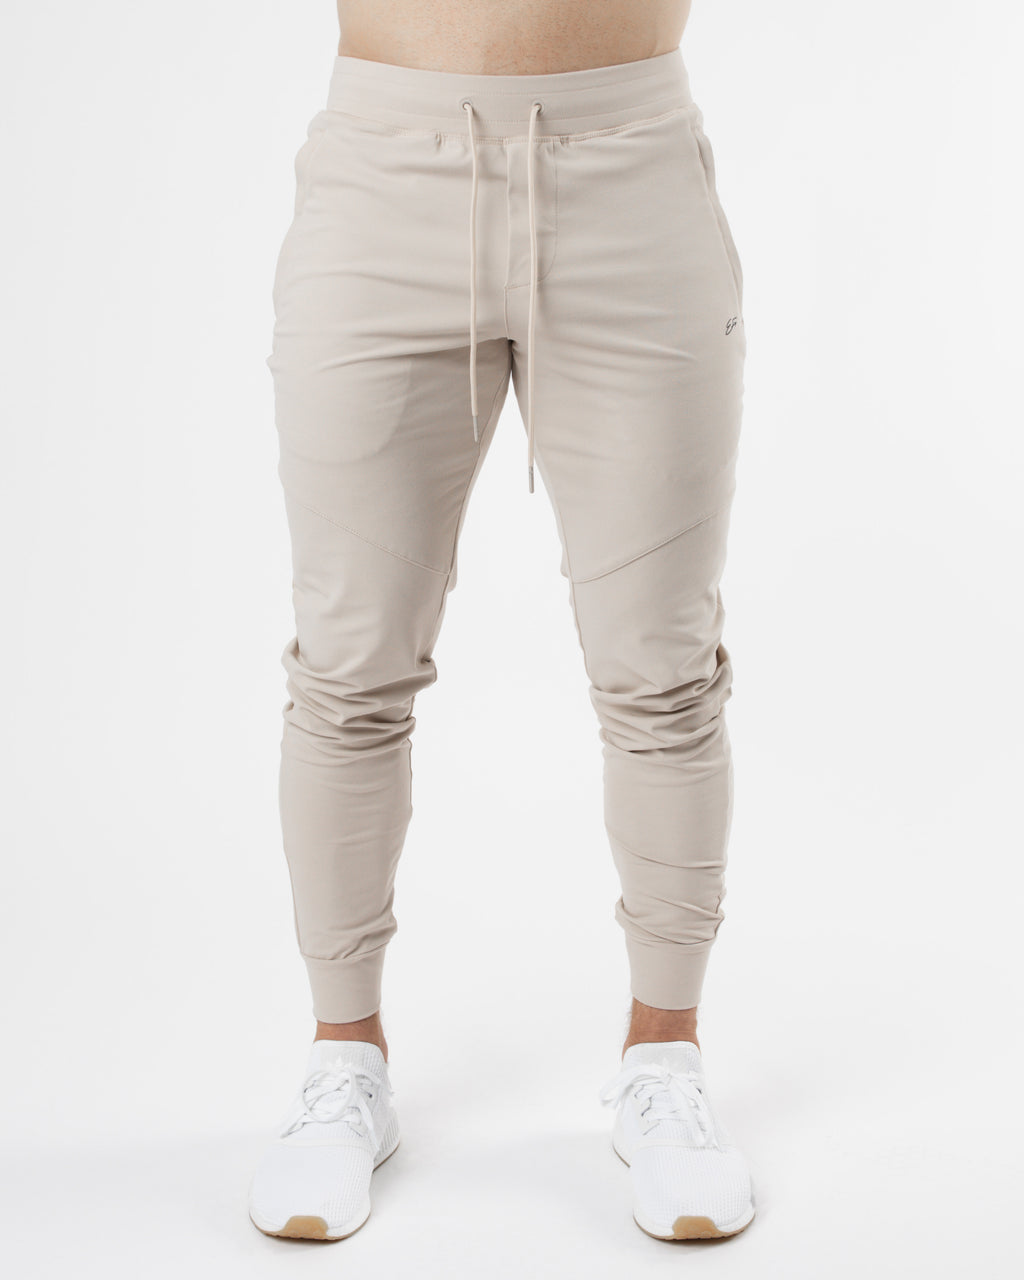 Belgravia Apparel and Safety Jogger: Safe, Stylish and a Seamless Fit -  Belgravia Apparel